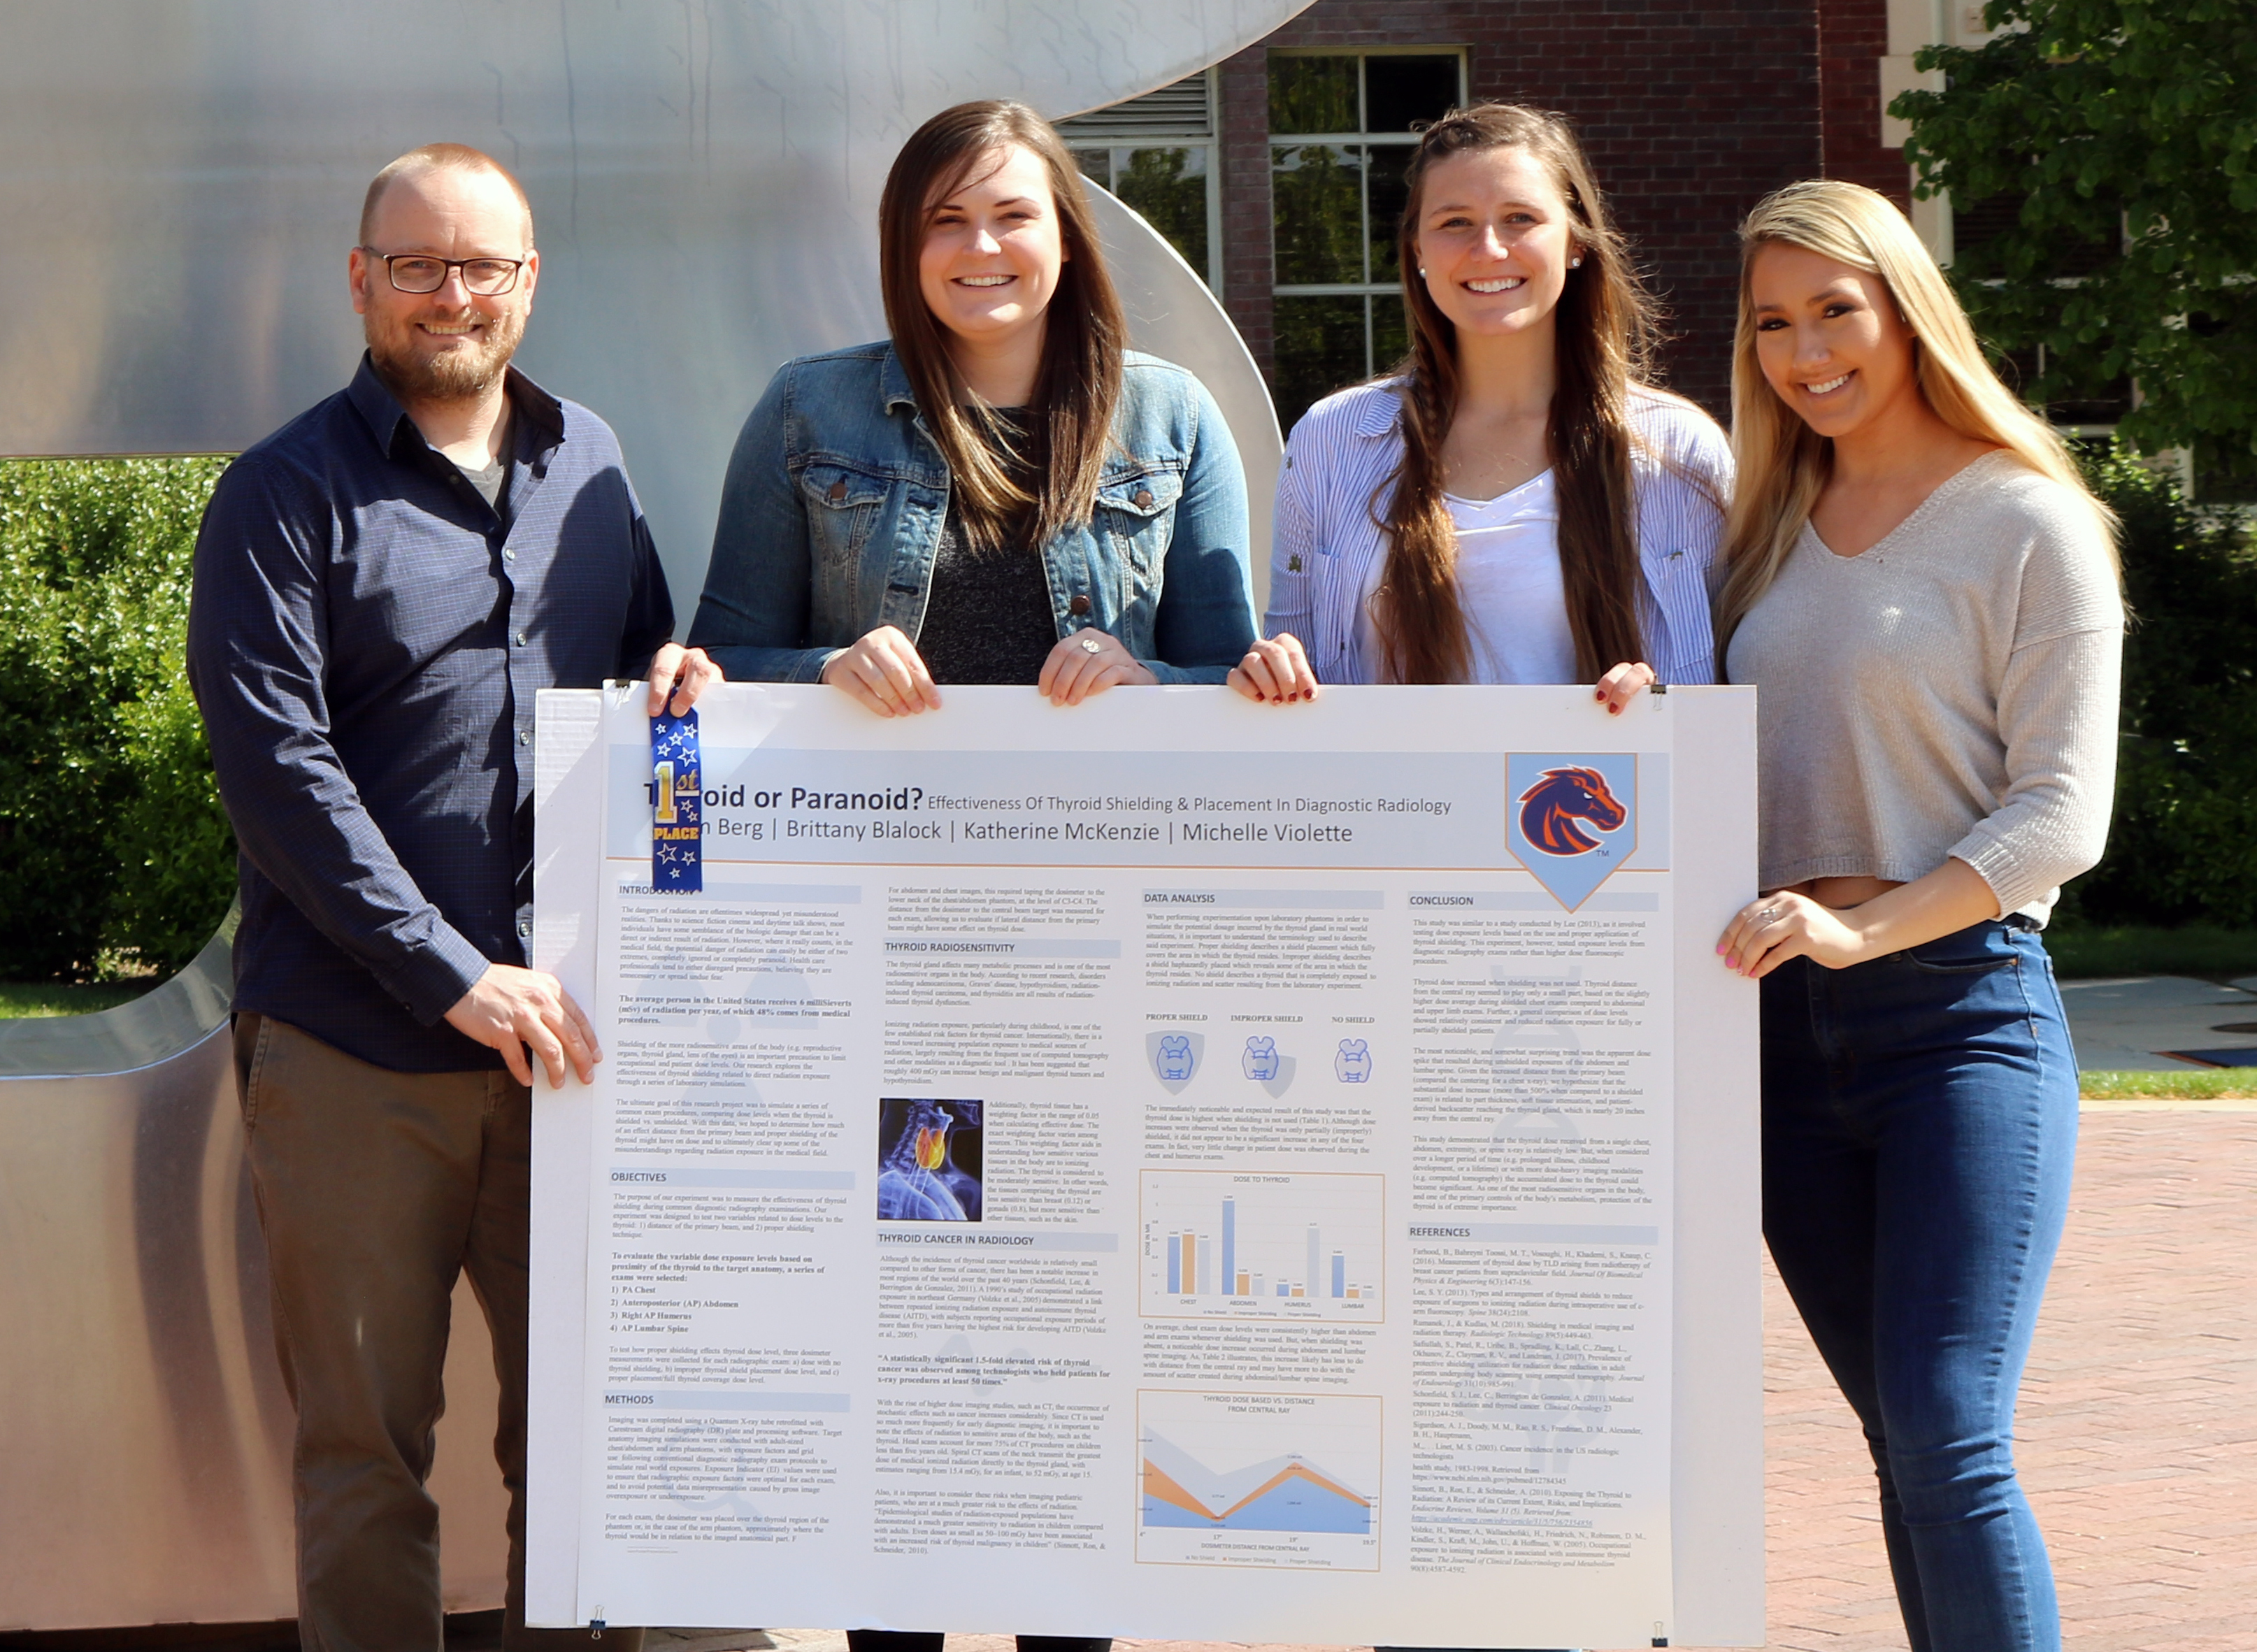 Students who won first place with their poster